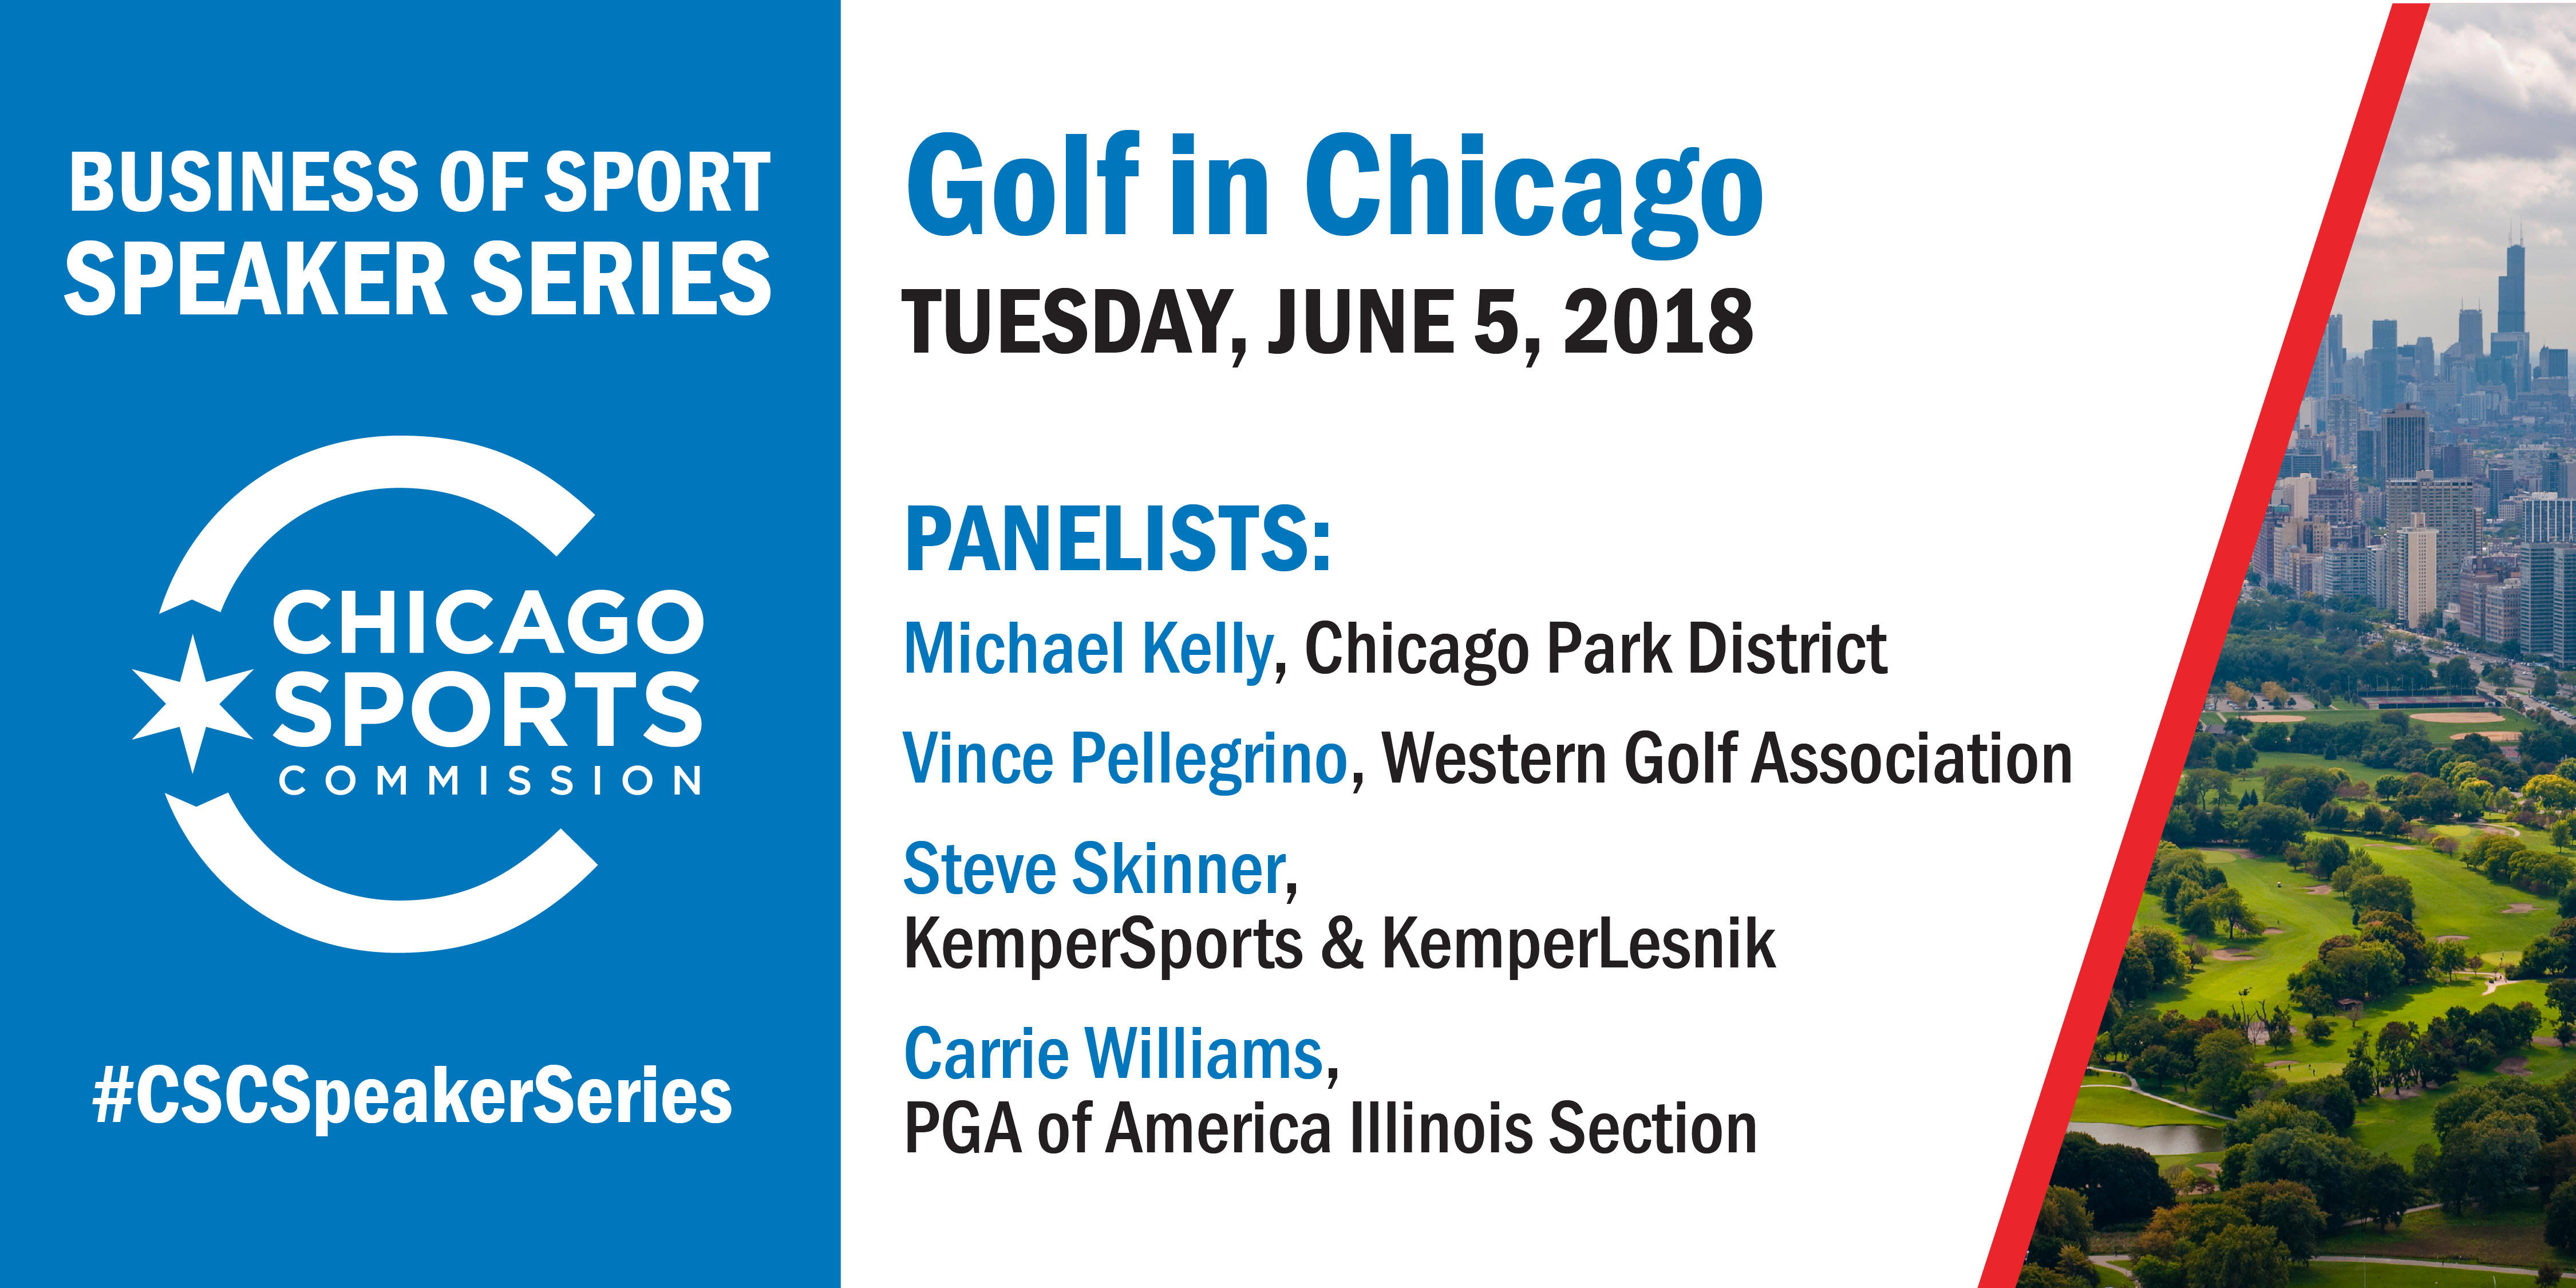 CSC Business of Sport Speaker Series: Golf in Chicago